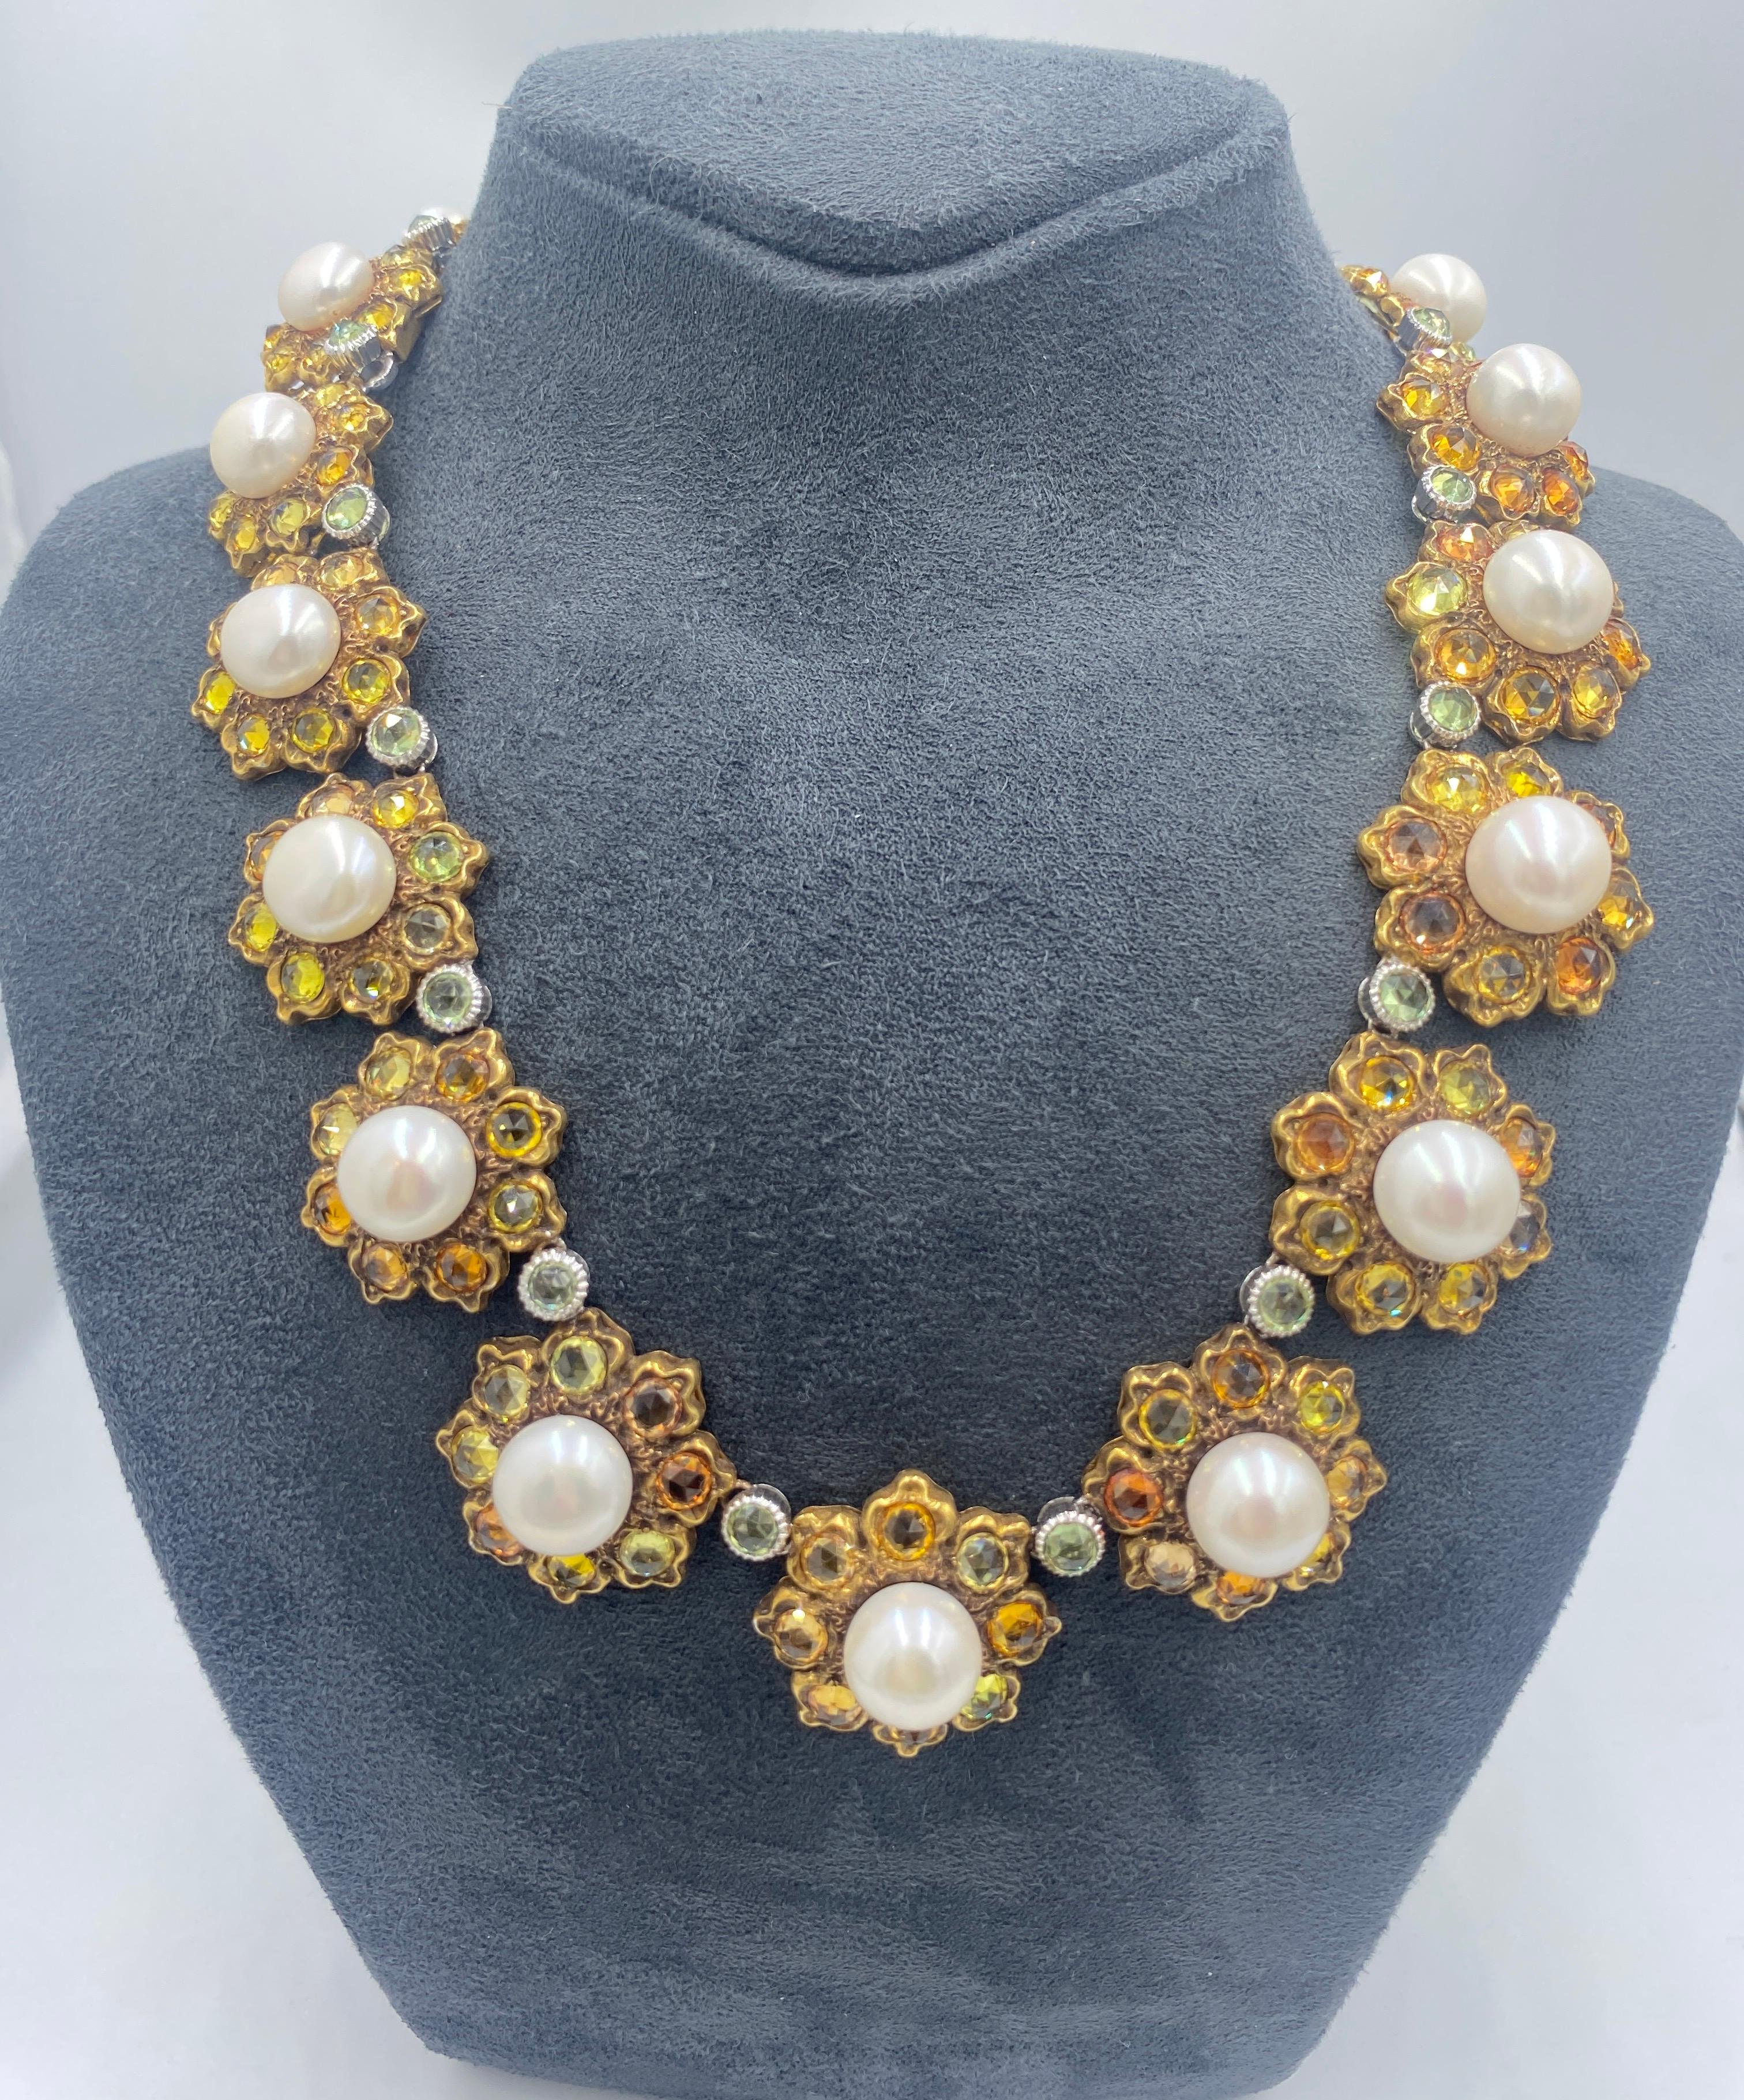 This magnificent 18 carat gold necklace designed by Gianmaria Buccalleti in 1980s consists of 18 floral links. Each flower has a large pearl in its centre and various shades of yellow sapphires as its 8 petals. The flowers are linked together by